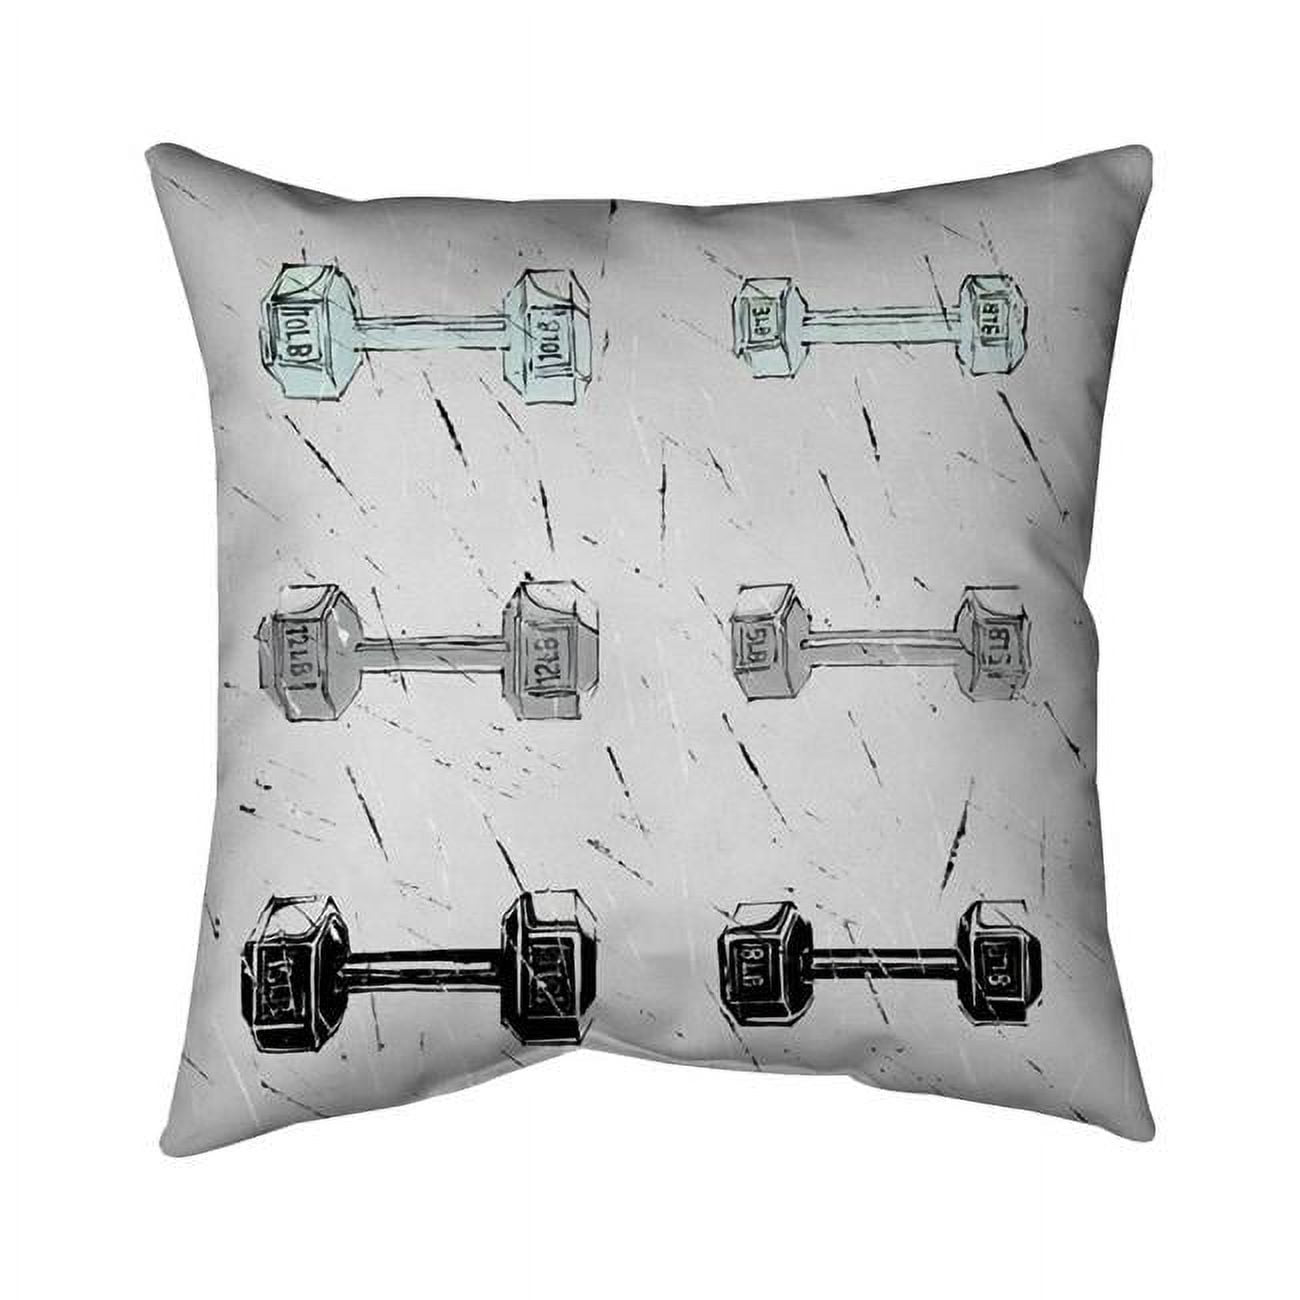 Begin Home Decor 5541-2020-SP71 20 x 20 in. Dumbbells-Double Sided Print Indoor Pillow